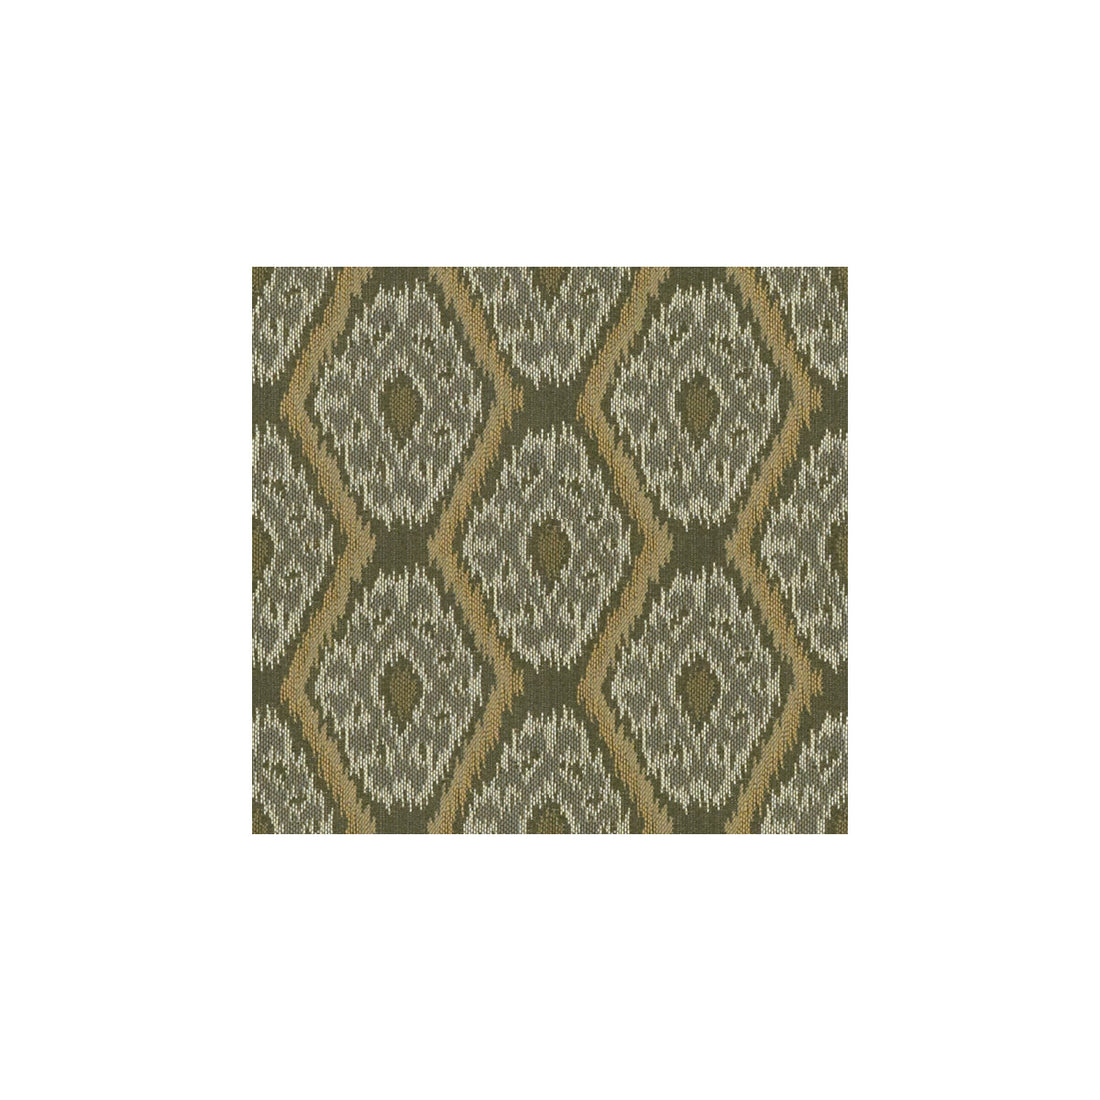 Sancho fabric in stonehenge color - pattern 32847.11.0 - by Kravet Contract in the Contract Gis collection